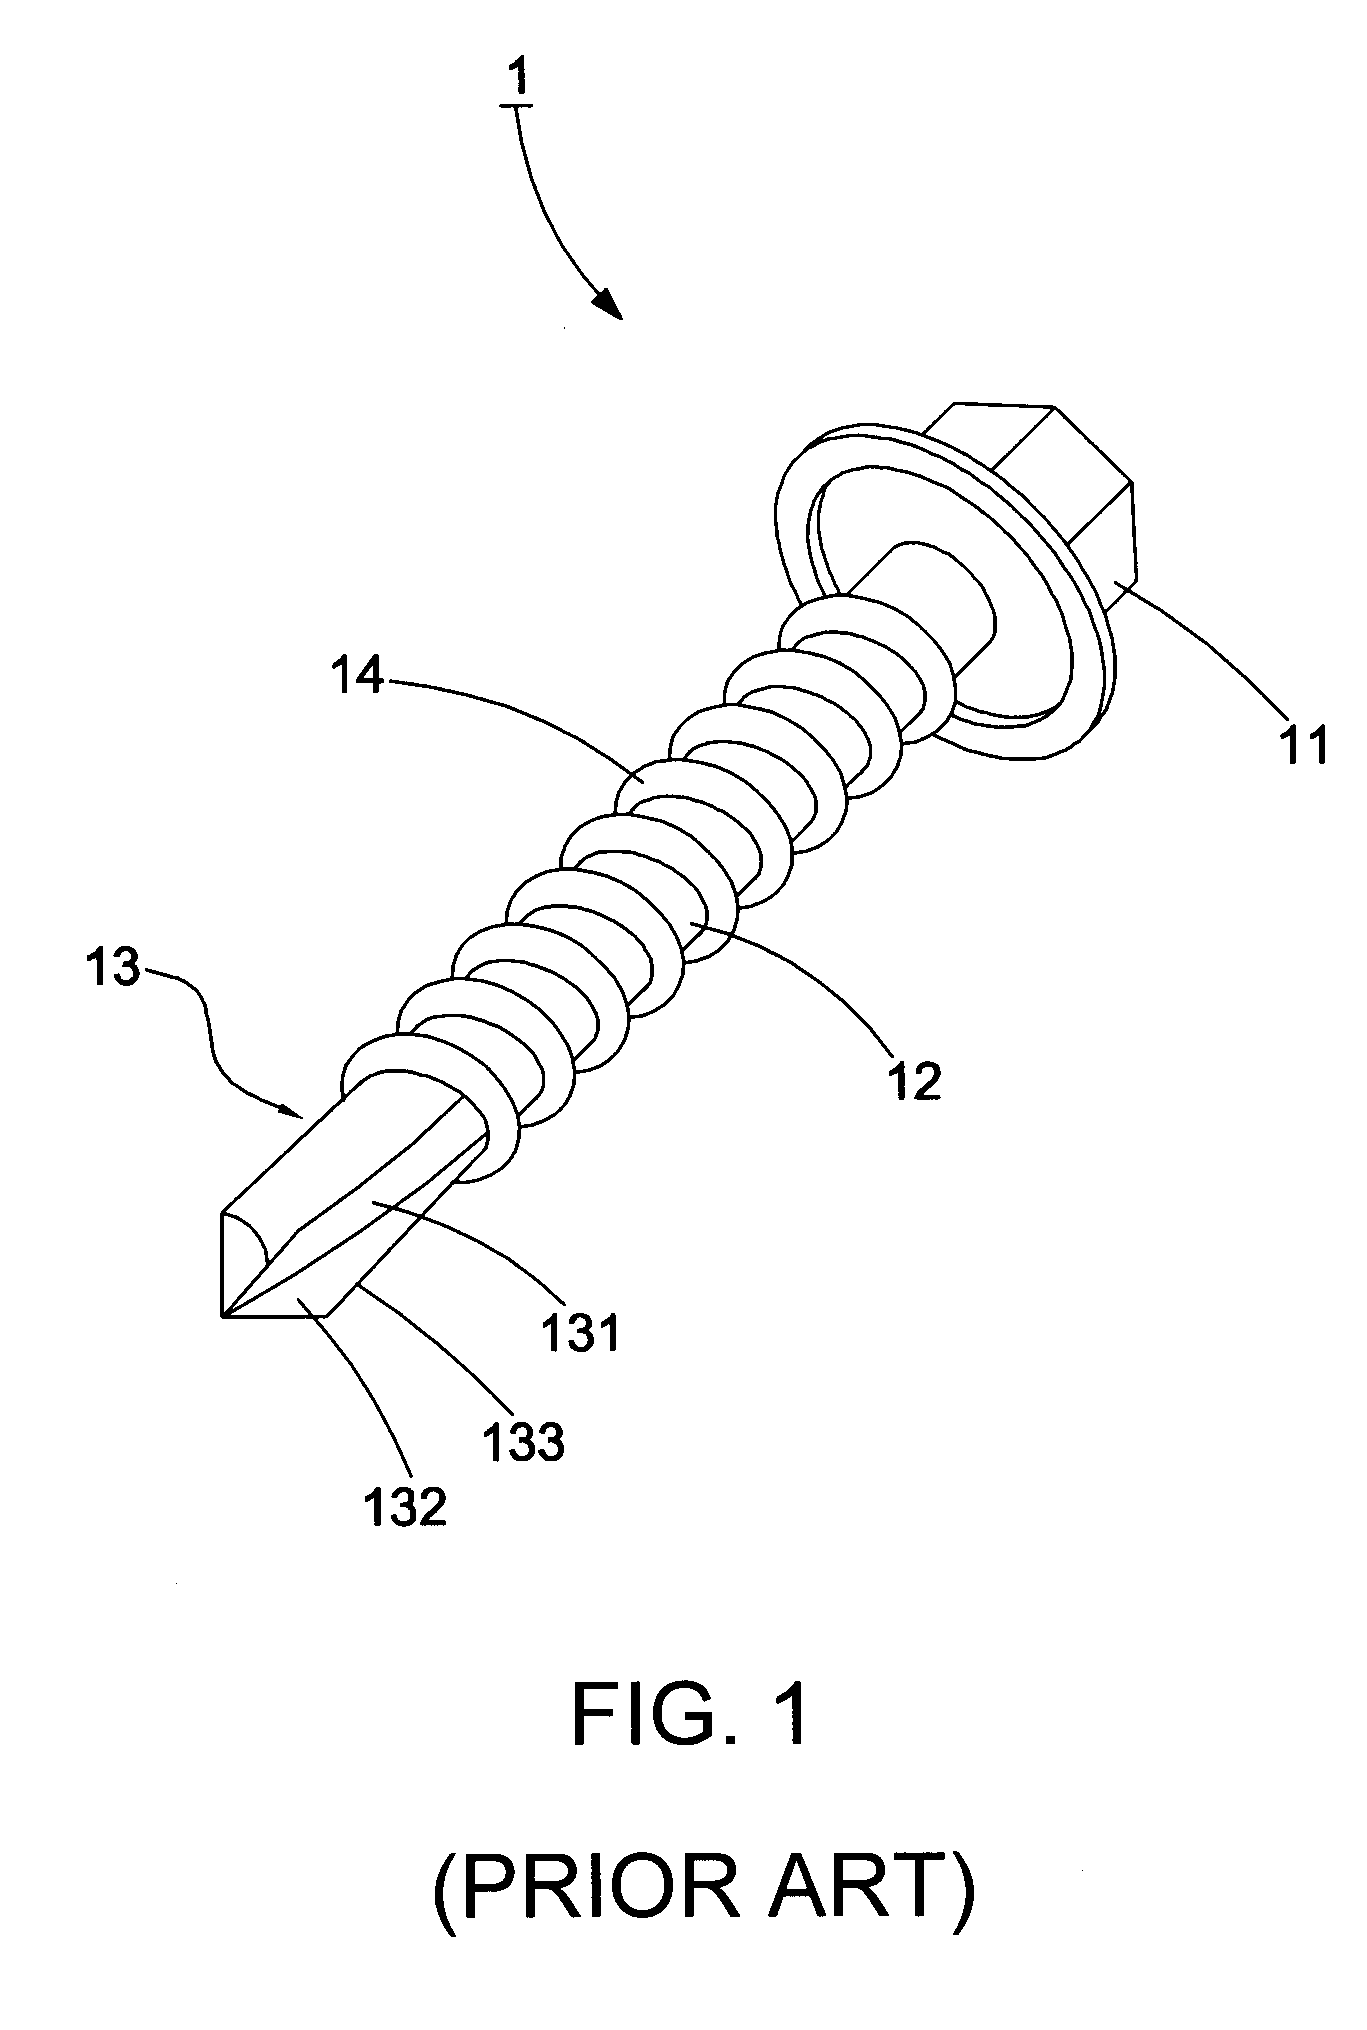 Self-drilling screw with multi-drilling portions